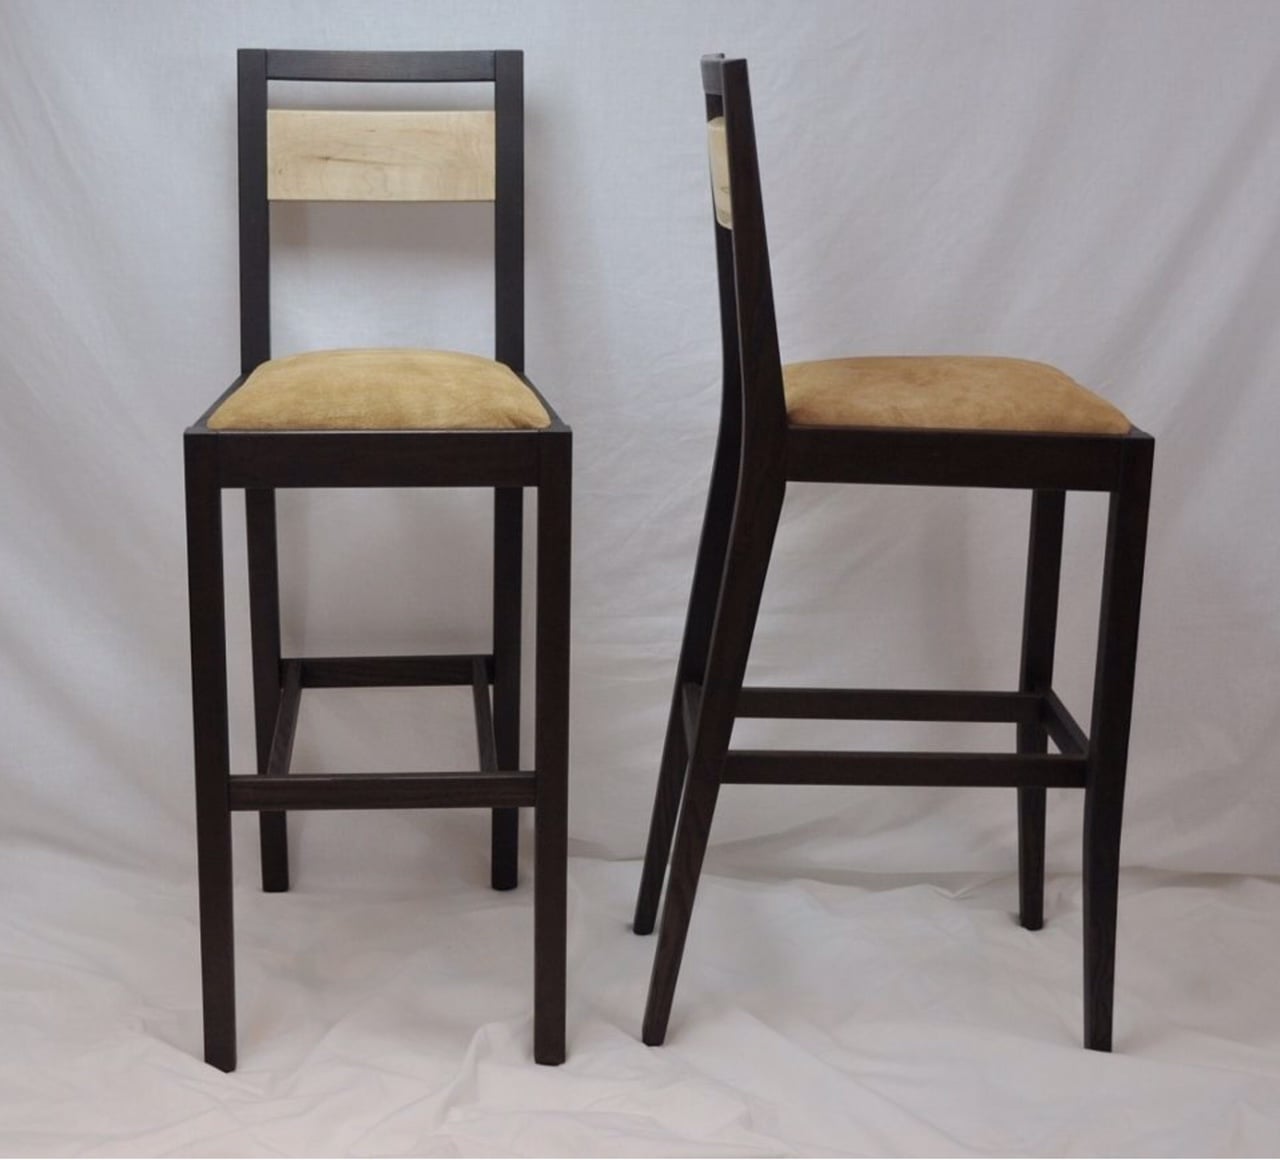 Made to Order Bar Stools Furniture. - BST 053-01